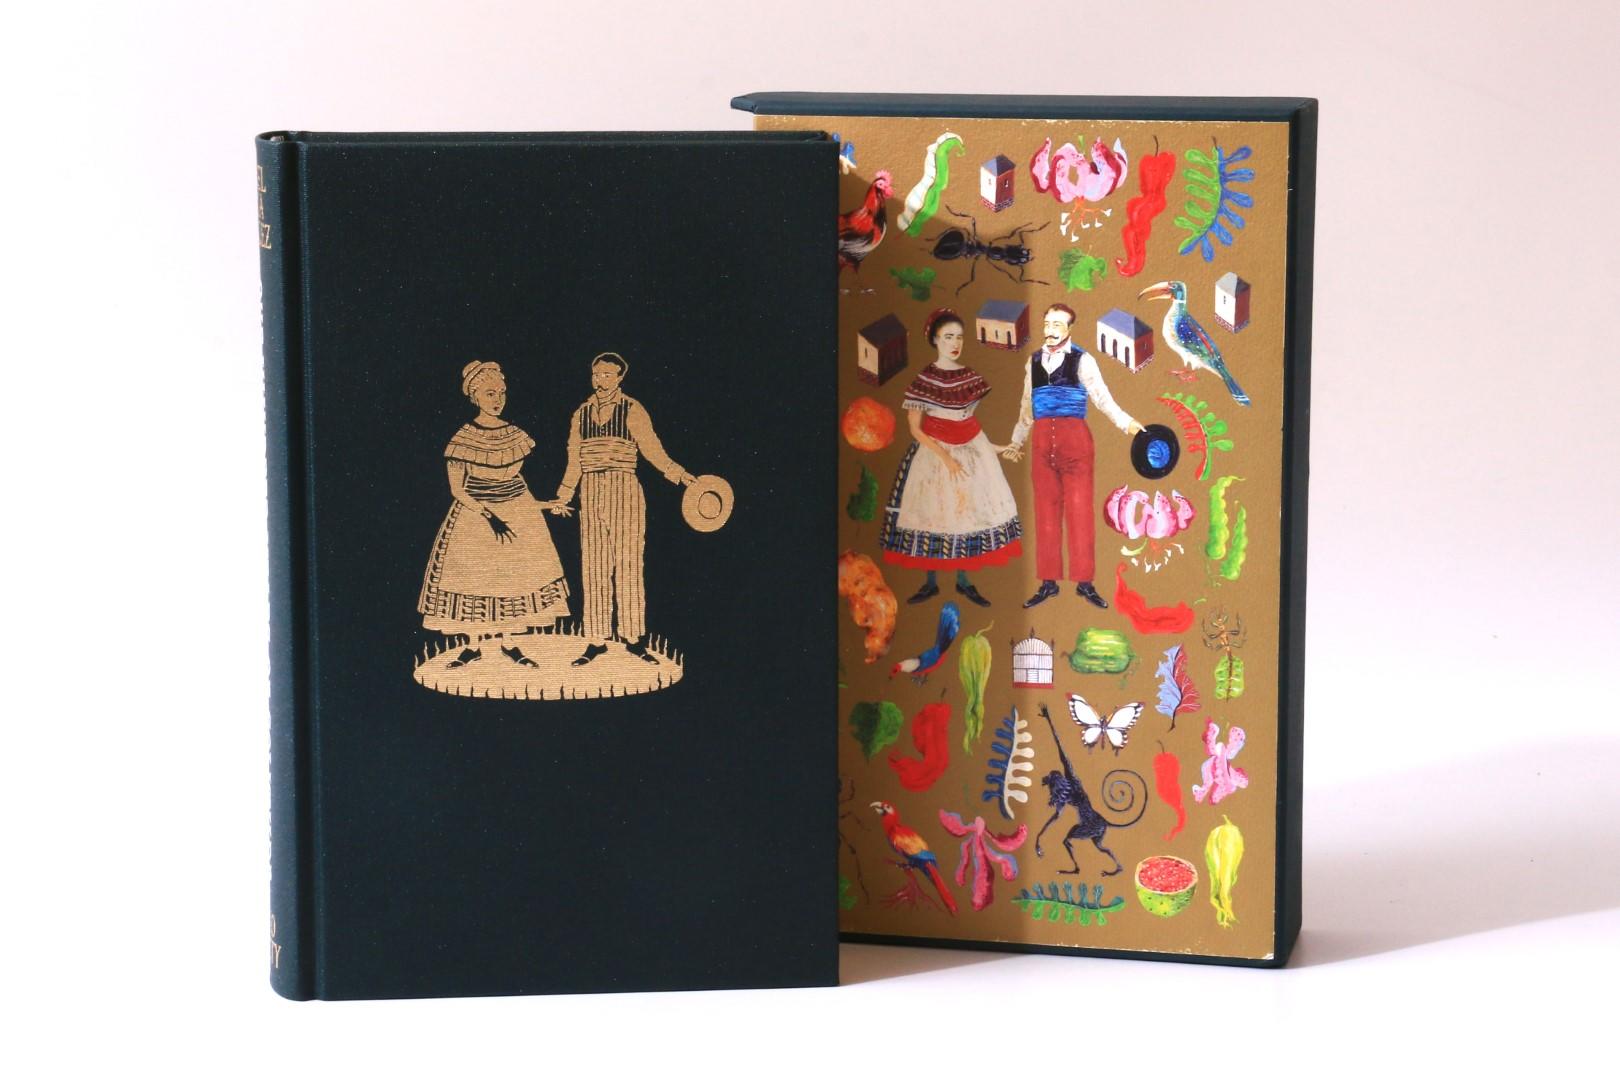 Gabriel Garcia Marquez - One Hundred Years of Solitude - Folio Society, 2007, First Edition.